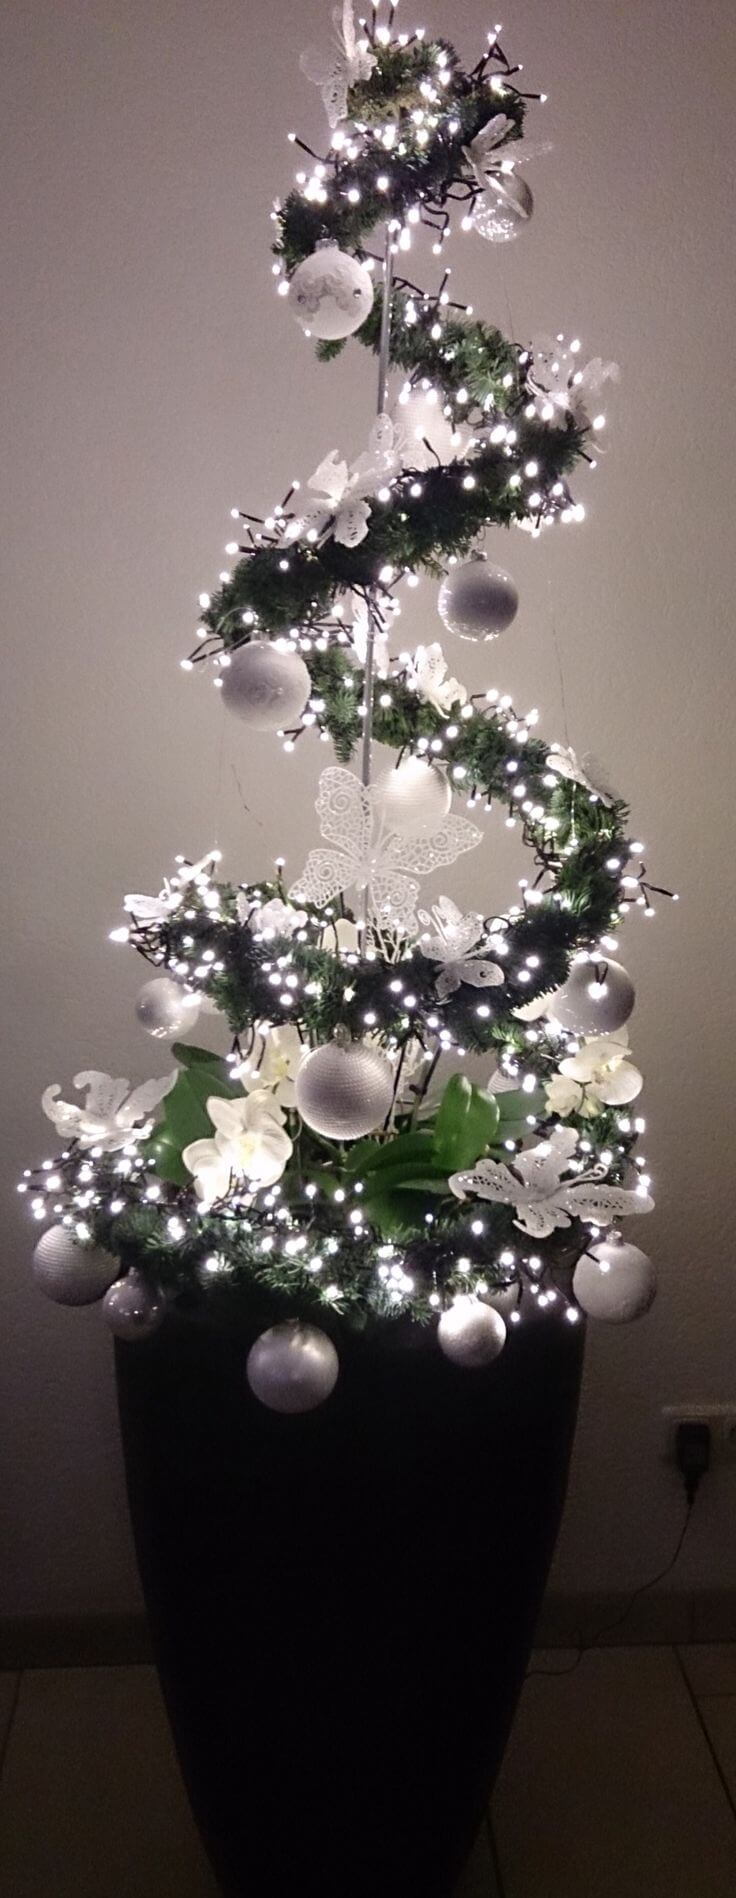 Pretty White Christmas "Tree" Project